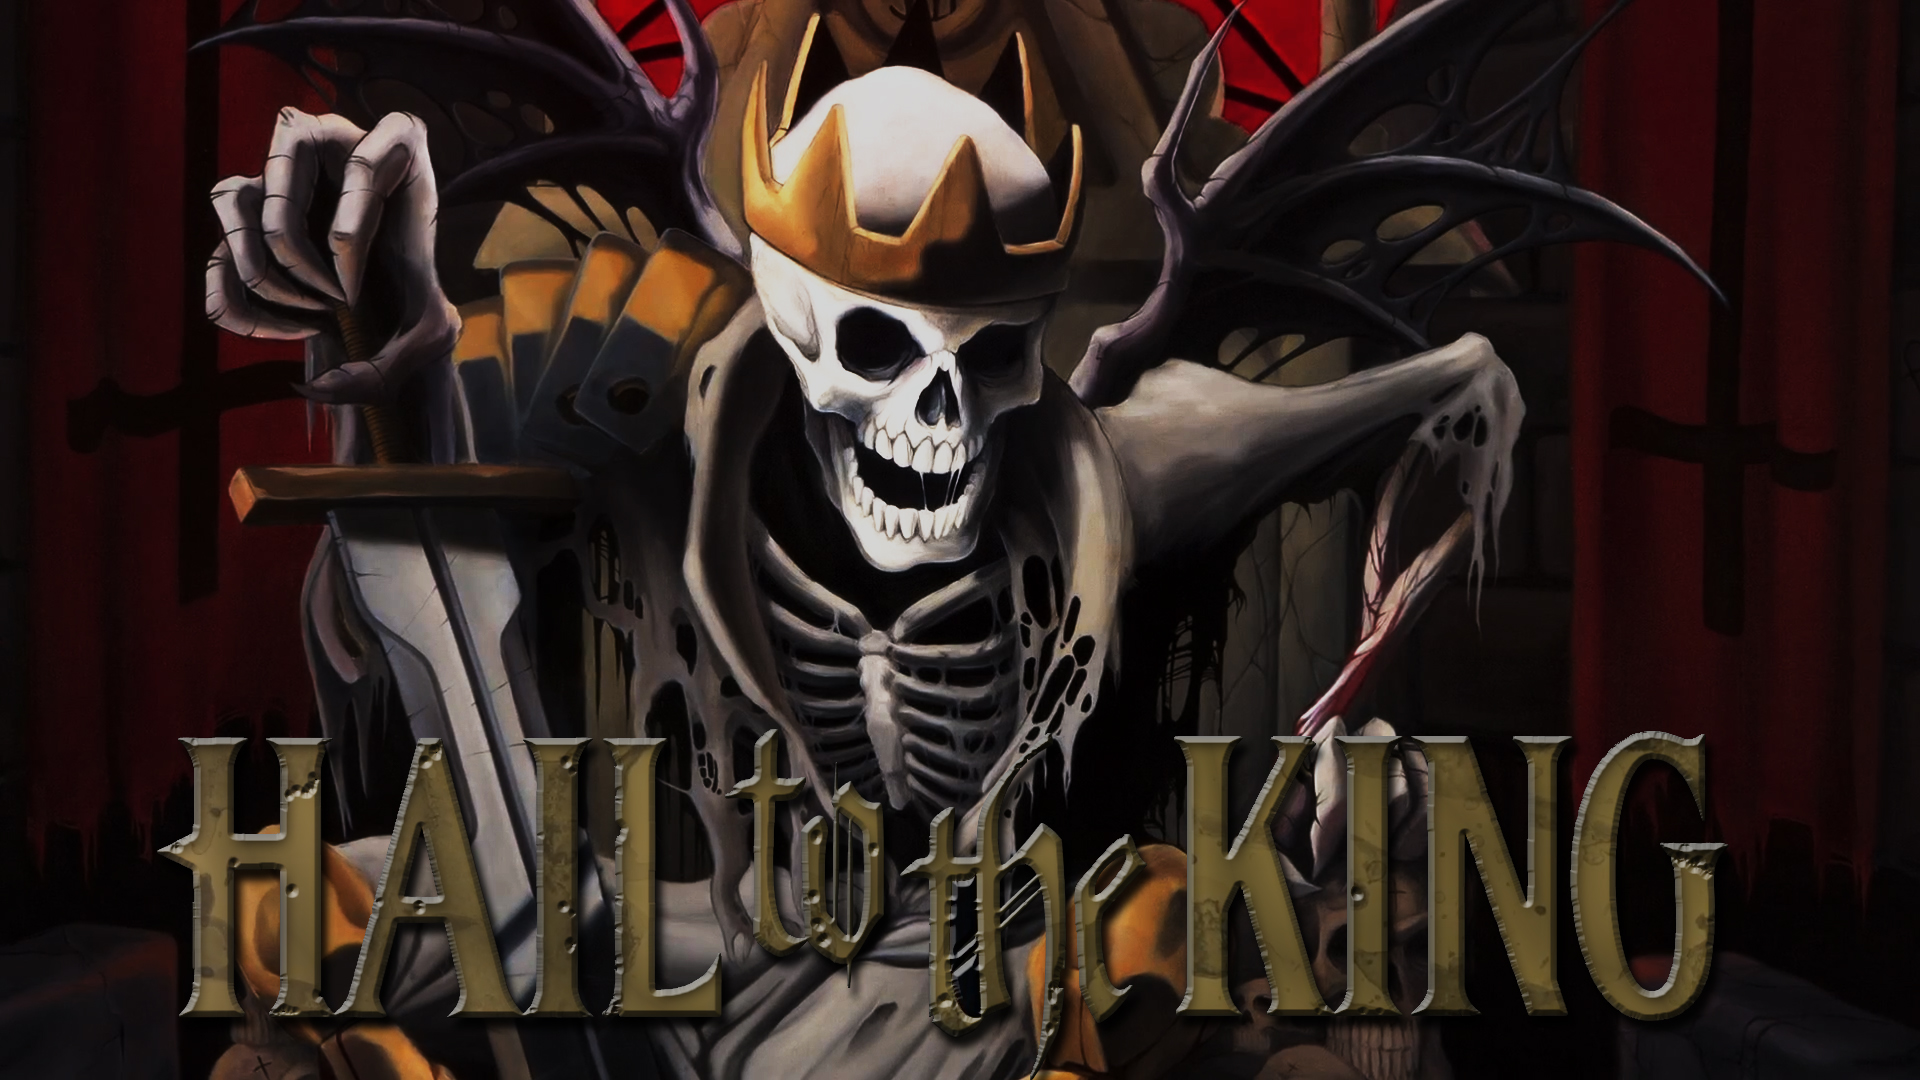 Hail To The King Avenged Sevenfold Wallpaper By Chaotichazard On